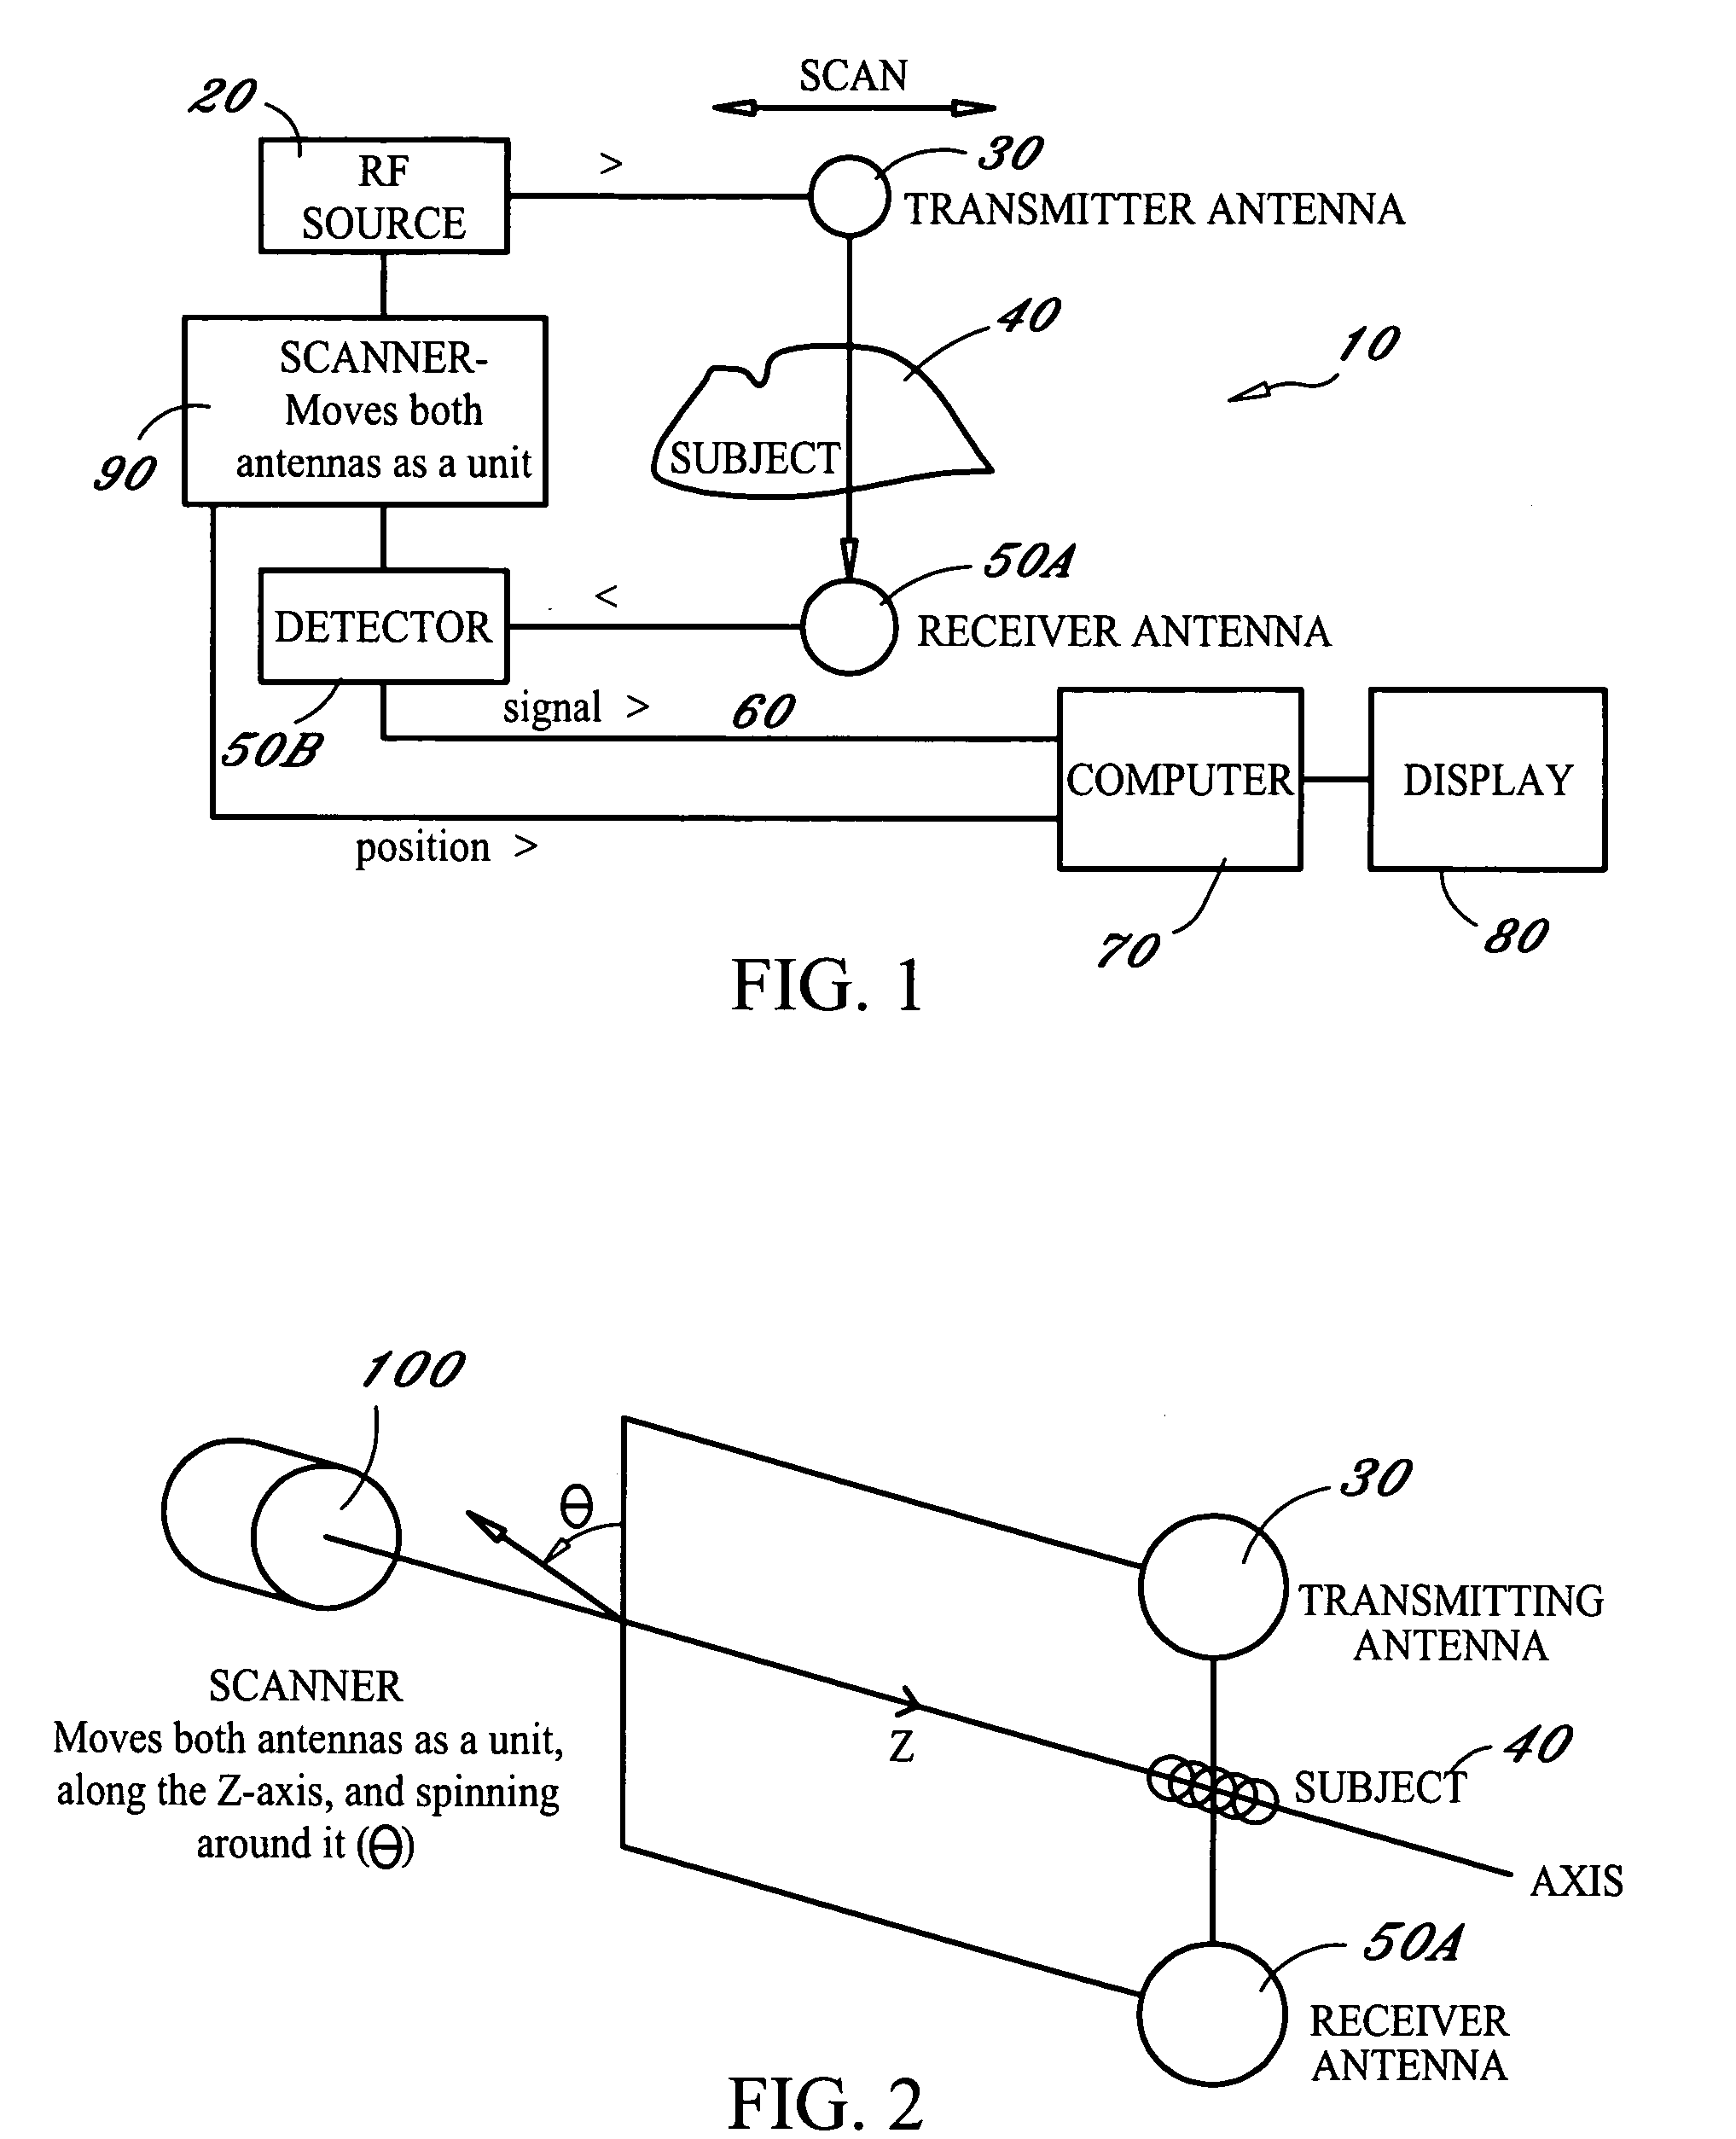 Radio-frequency imaging system for medical and other applications